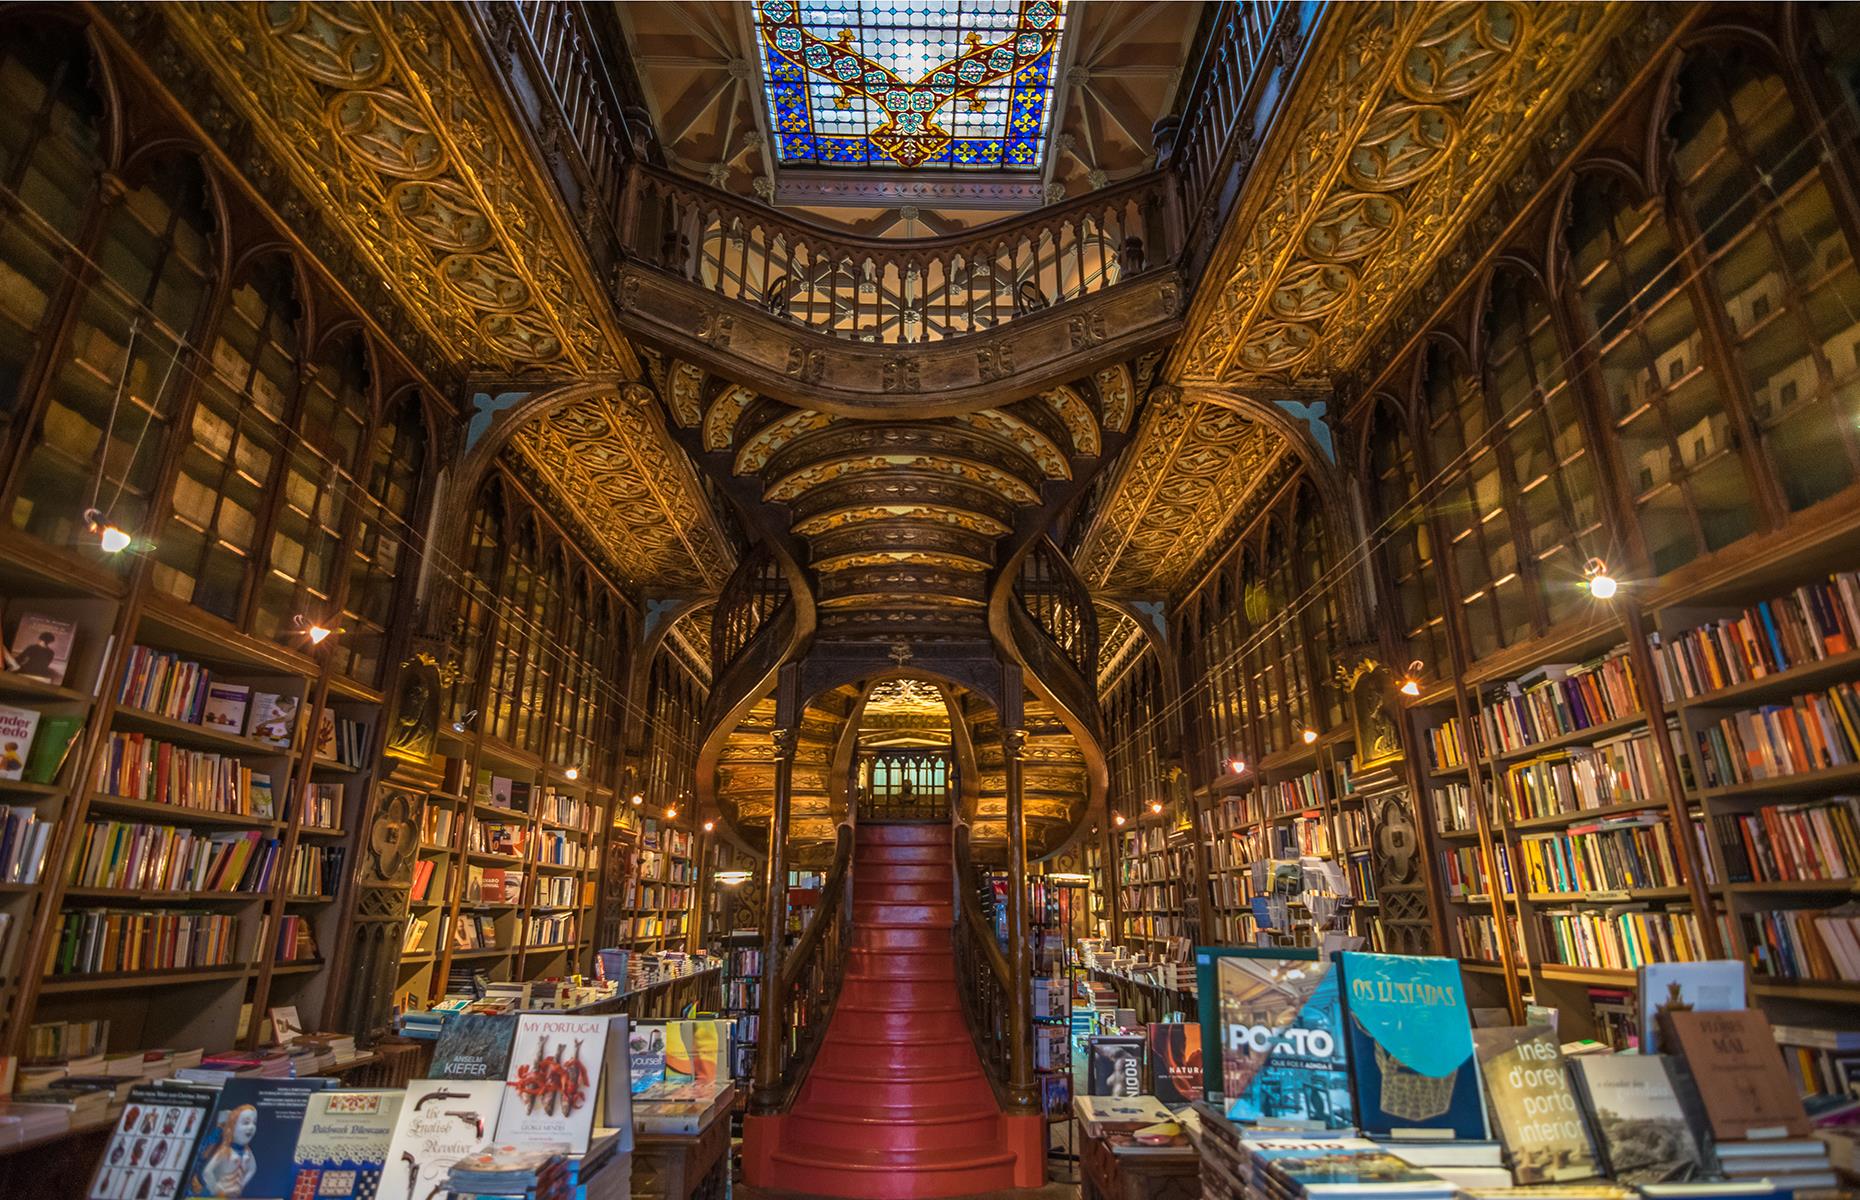 <p>With its swirling grand staircase, Gothic-style bookcases and ornate stained-glass ceiling, it’s rumored that <a href="https://www.livrarialello.pt/pt/home">Livraria Lello</a> was one of J.K Rowling’s inspirations for the Hogwarts Library in the <em>Harry Potter</em> series. Be wowed by its awe-inspiring interior, then pick up some copies from the library's specially-curated children's collection: books like <em>Alice in Wonderland</em> and <em>The Wizard of Oz</em> have been brought to life by local illustrators.</p>